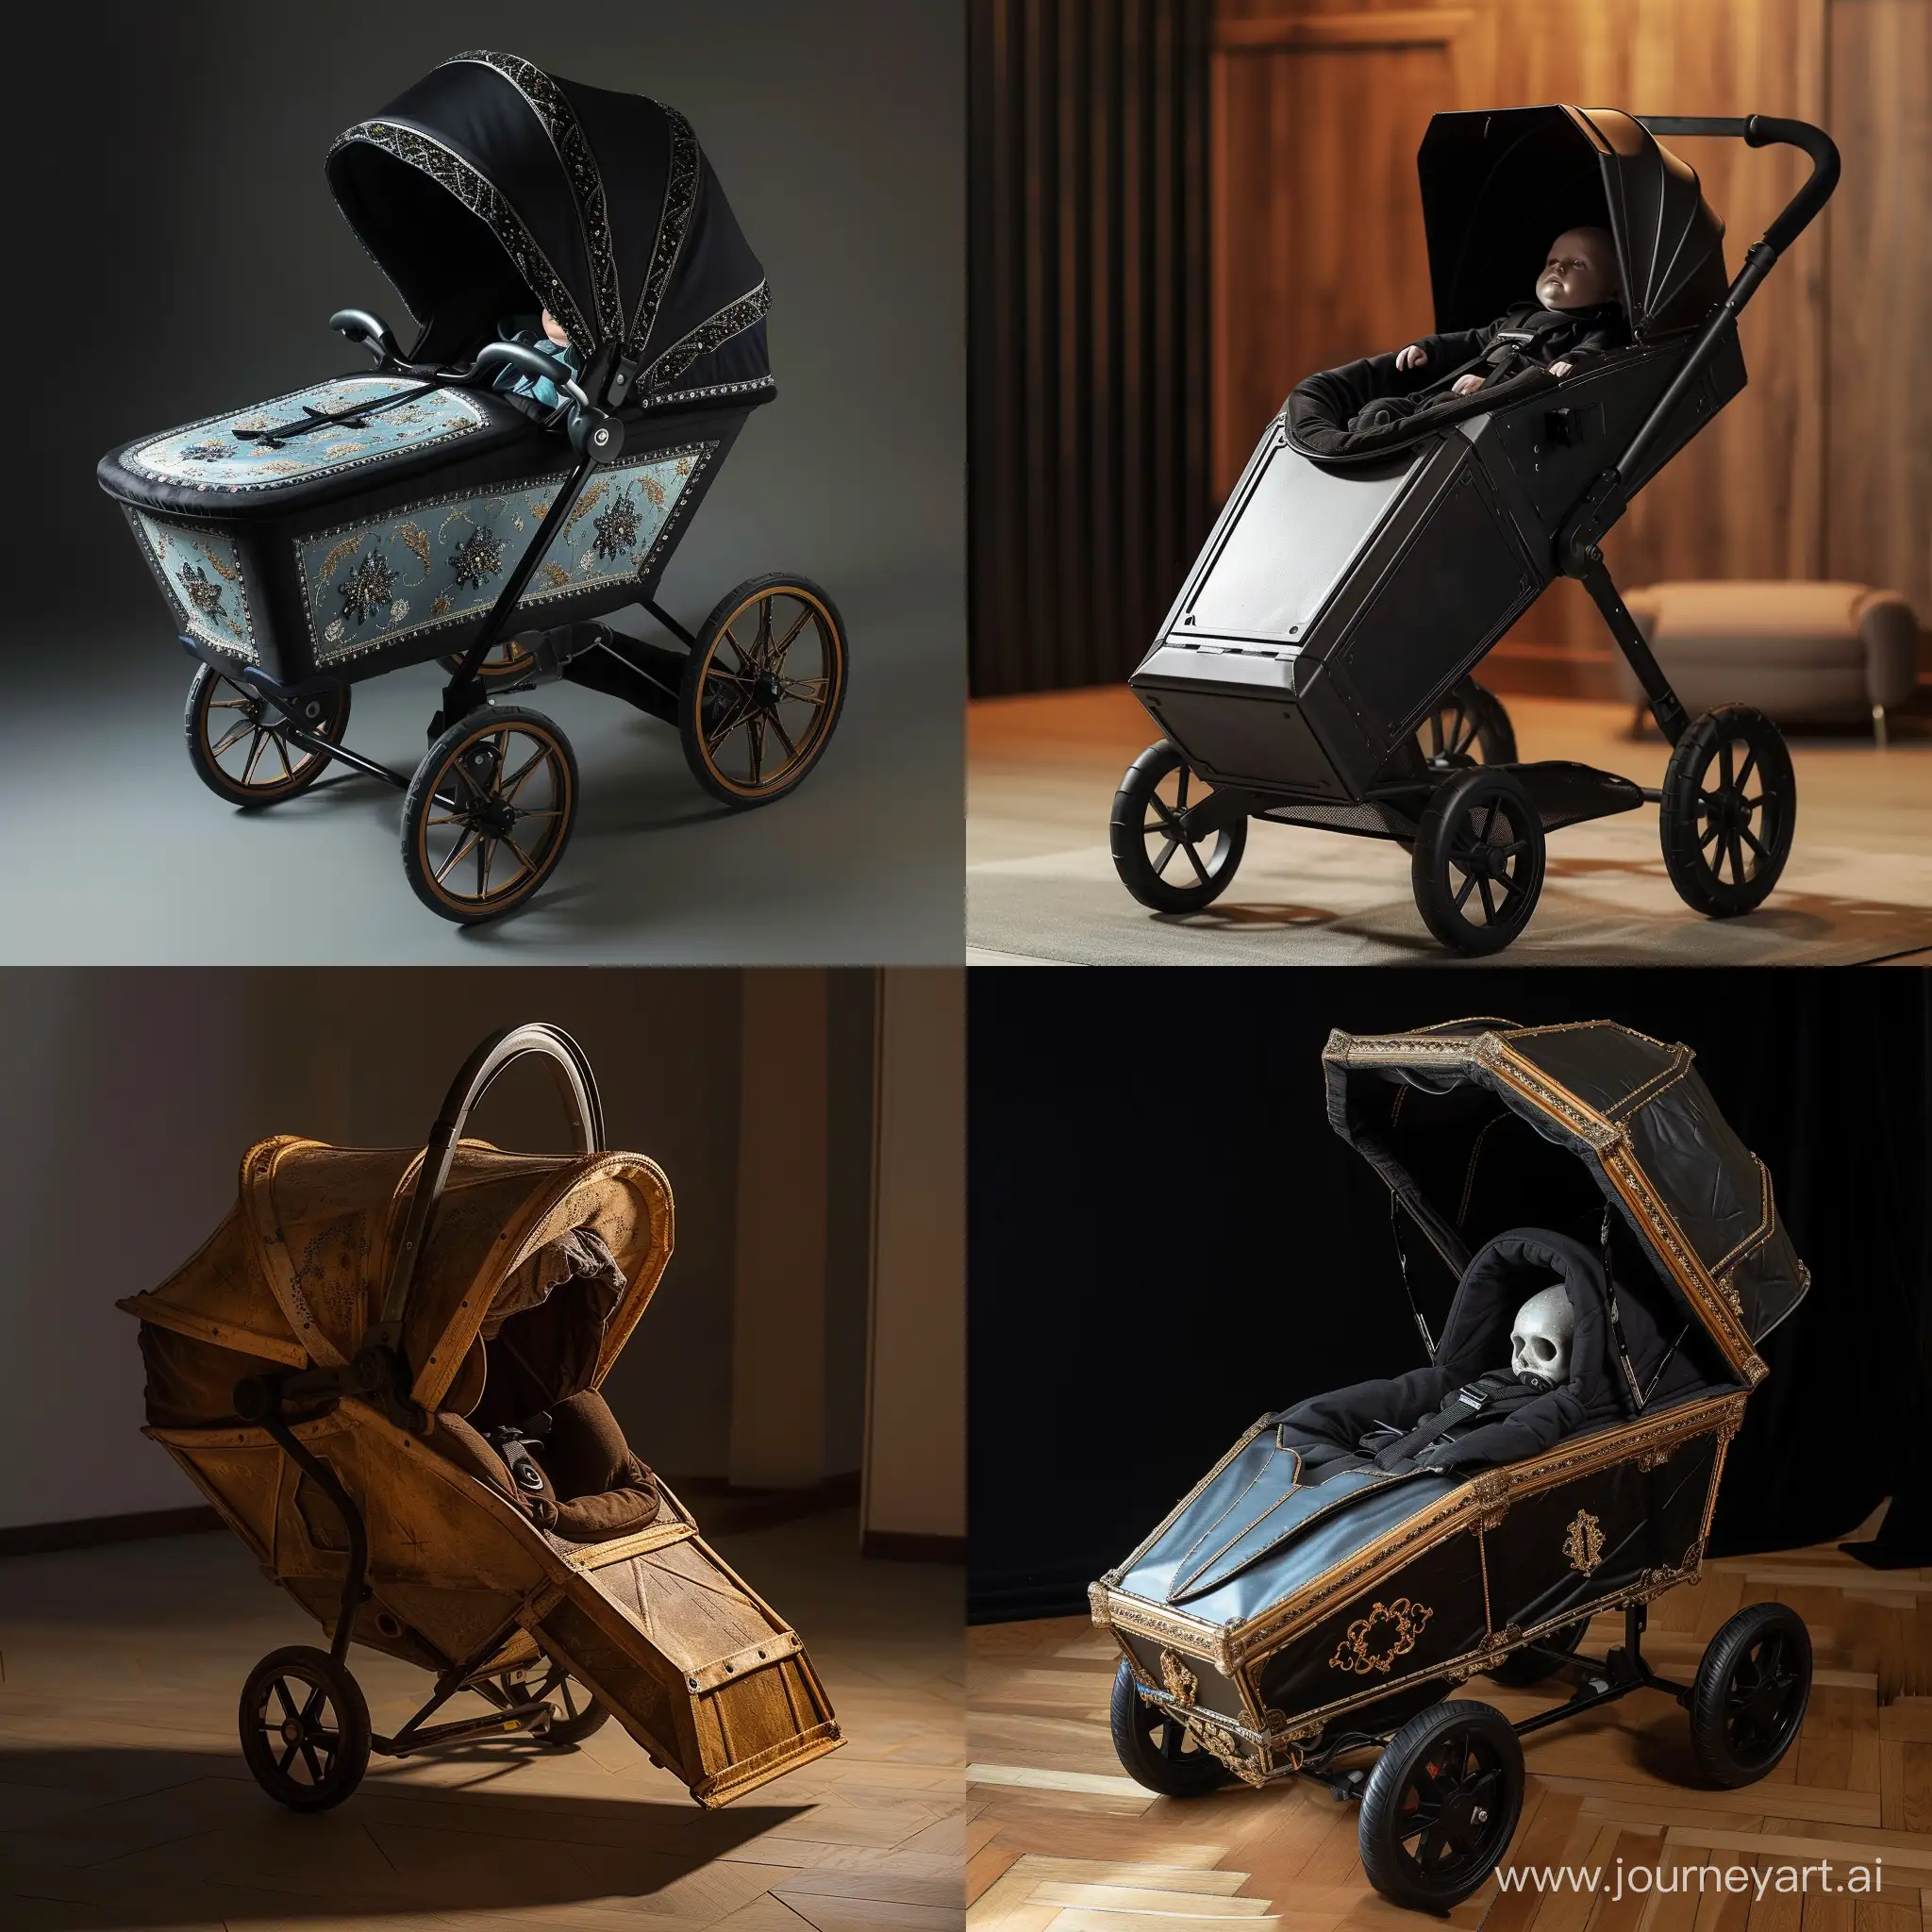 Unique-Baby-Stroller-Coffinshaped-Pram-for-a-Distinctive-Style